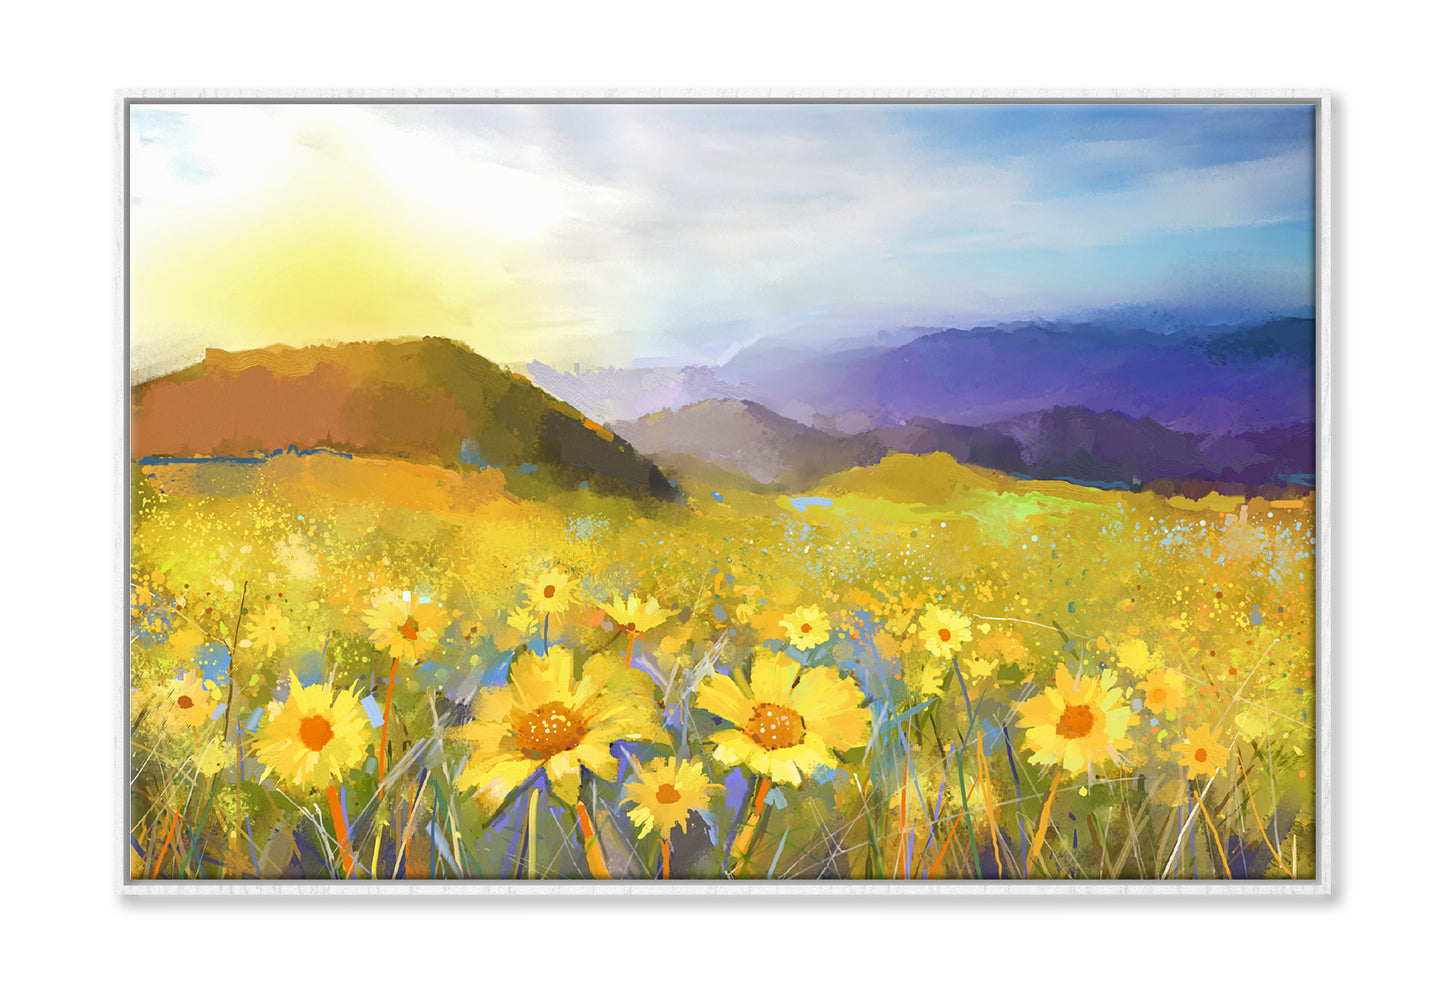 Daisy Flower Blossom, Warm Light Of The Sunset & Hill Oil Painting Limited Edition High Quality Print Canvas Box Framed White